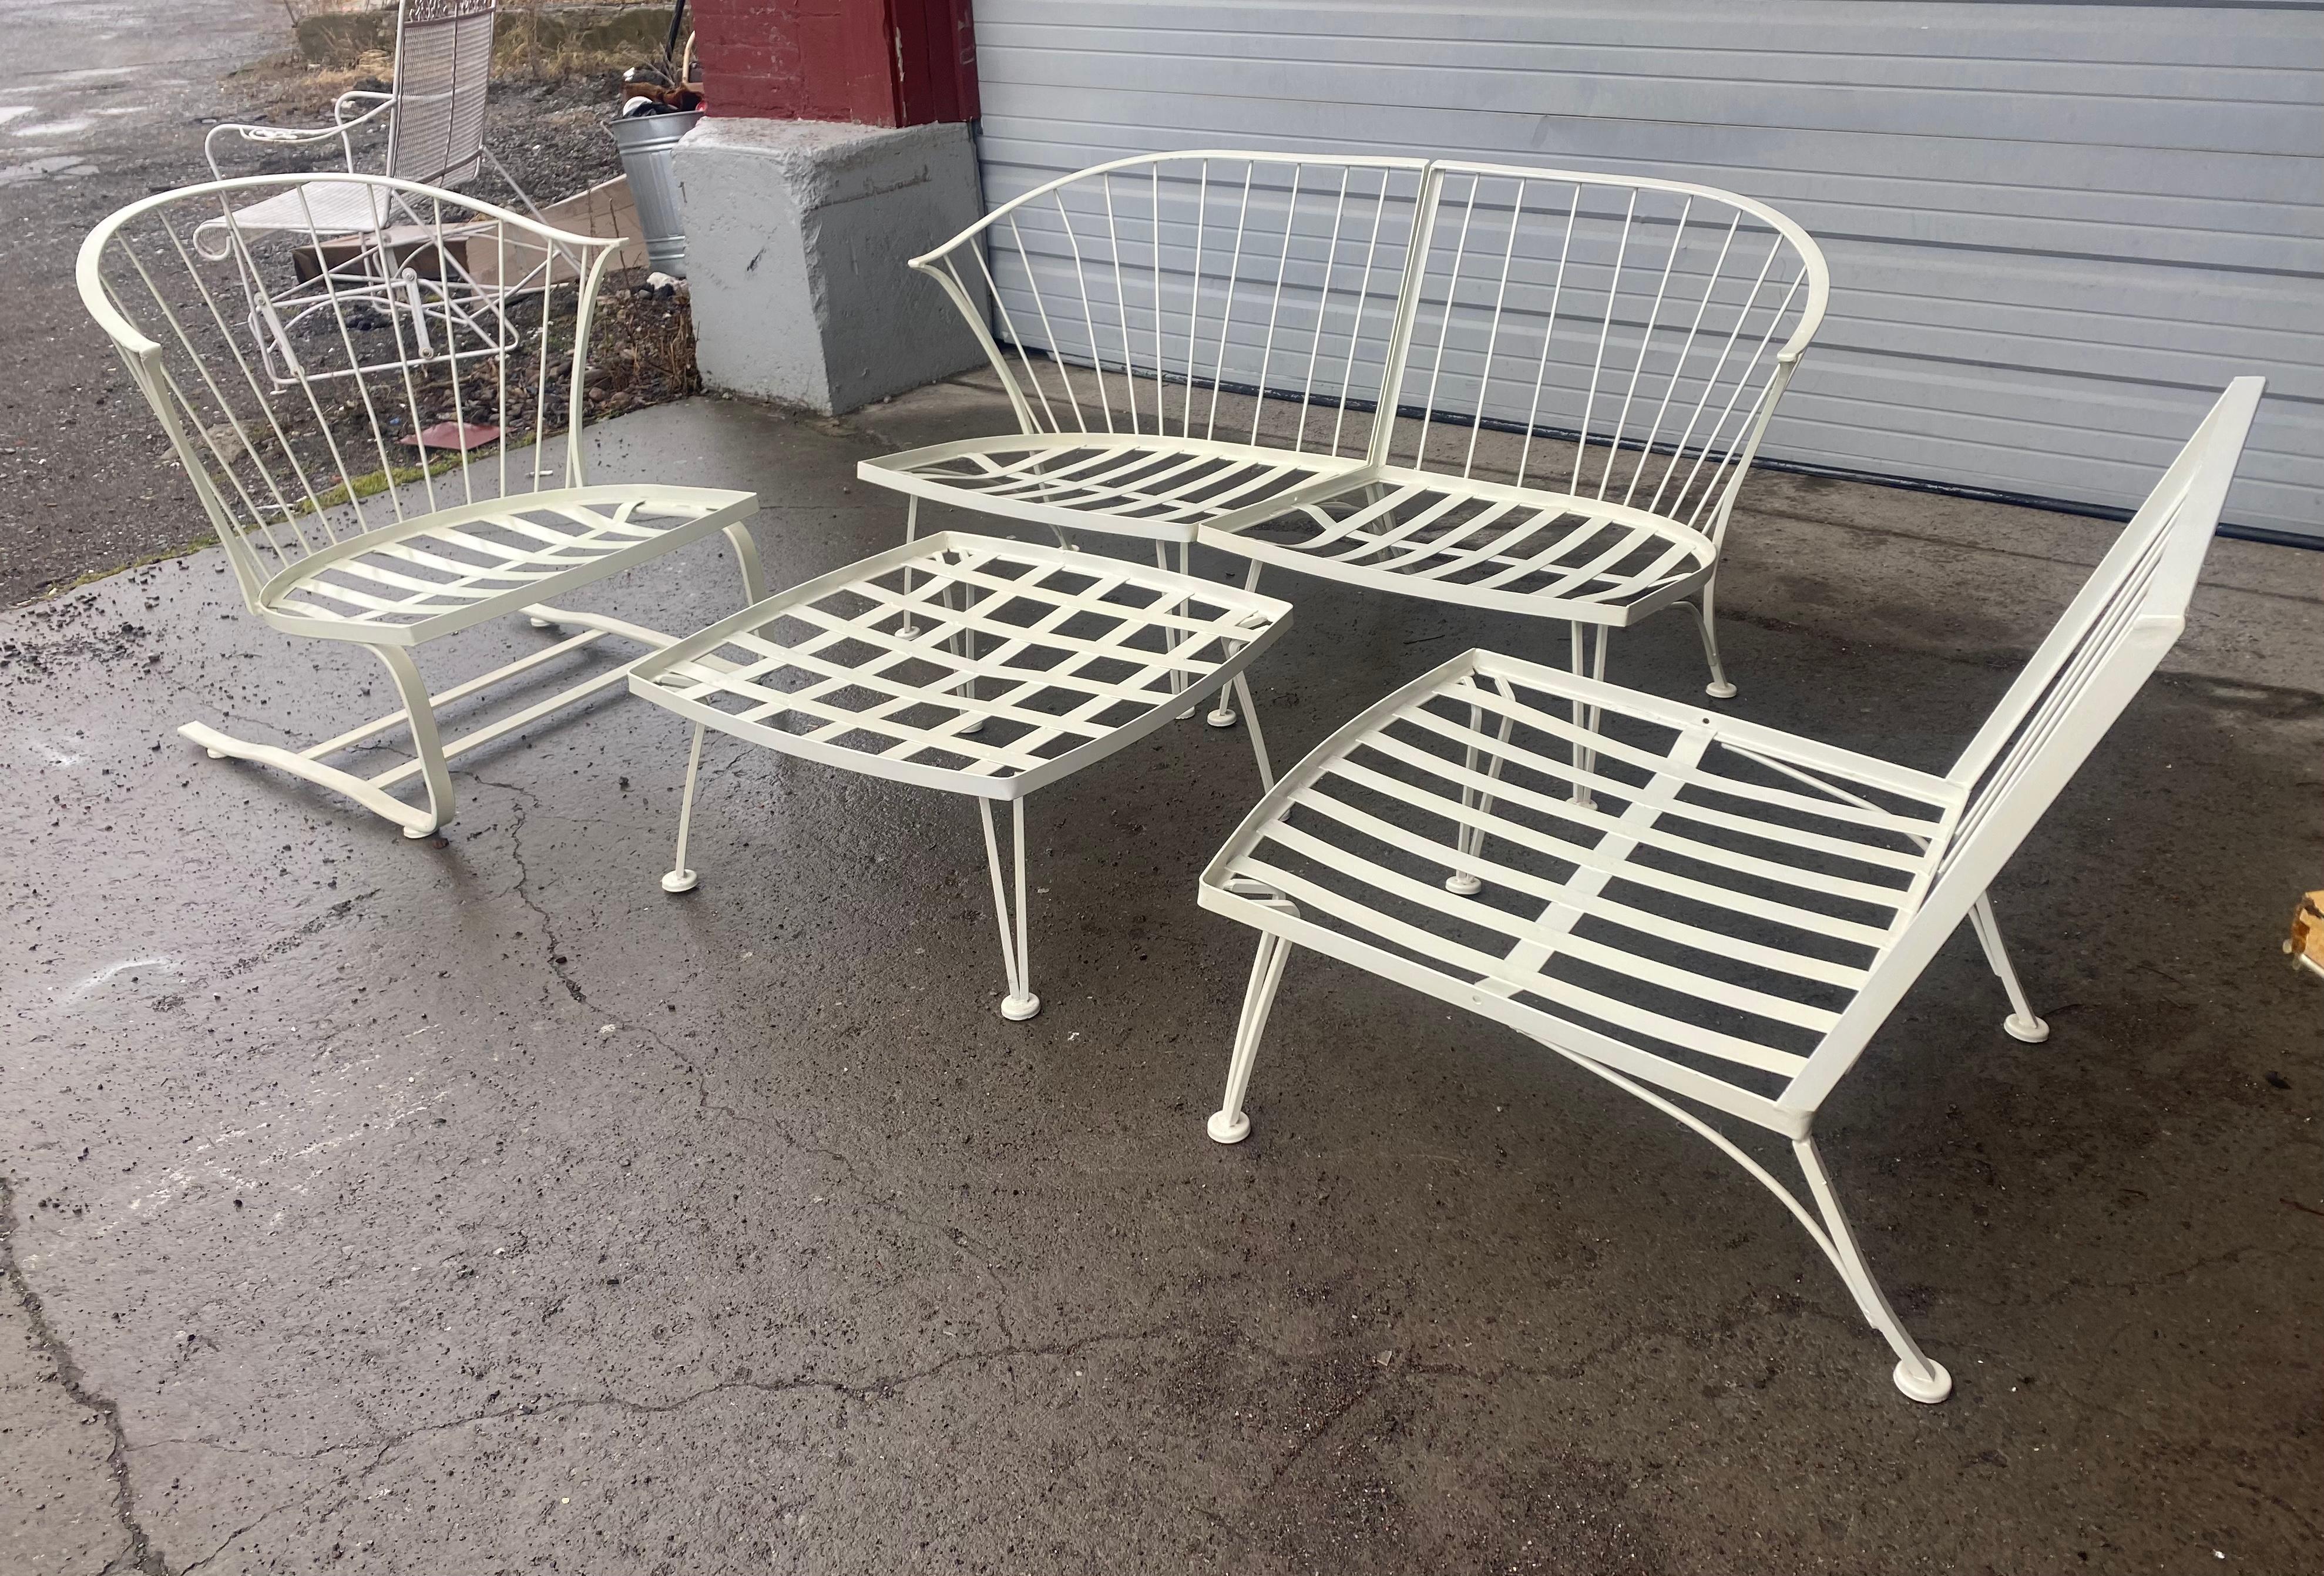 Set of 5-piece 1950's Pinecrest lounge seating by Woodard, alternative seating configurations. ie: 3 seater sofa. 2-seater sofa with separate chair. Extremely rare spring steel arm chair (rocker) and ottoman. Cushions included but in need of